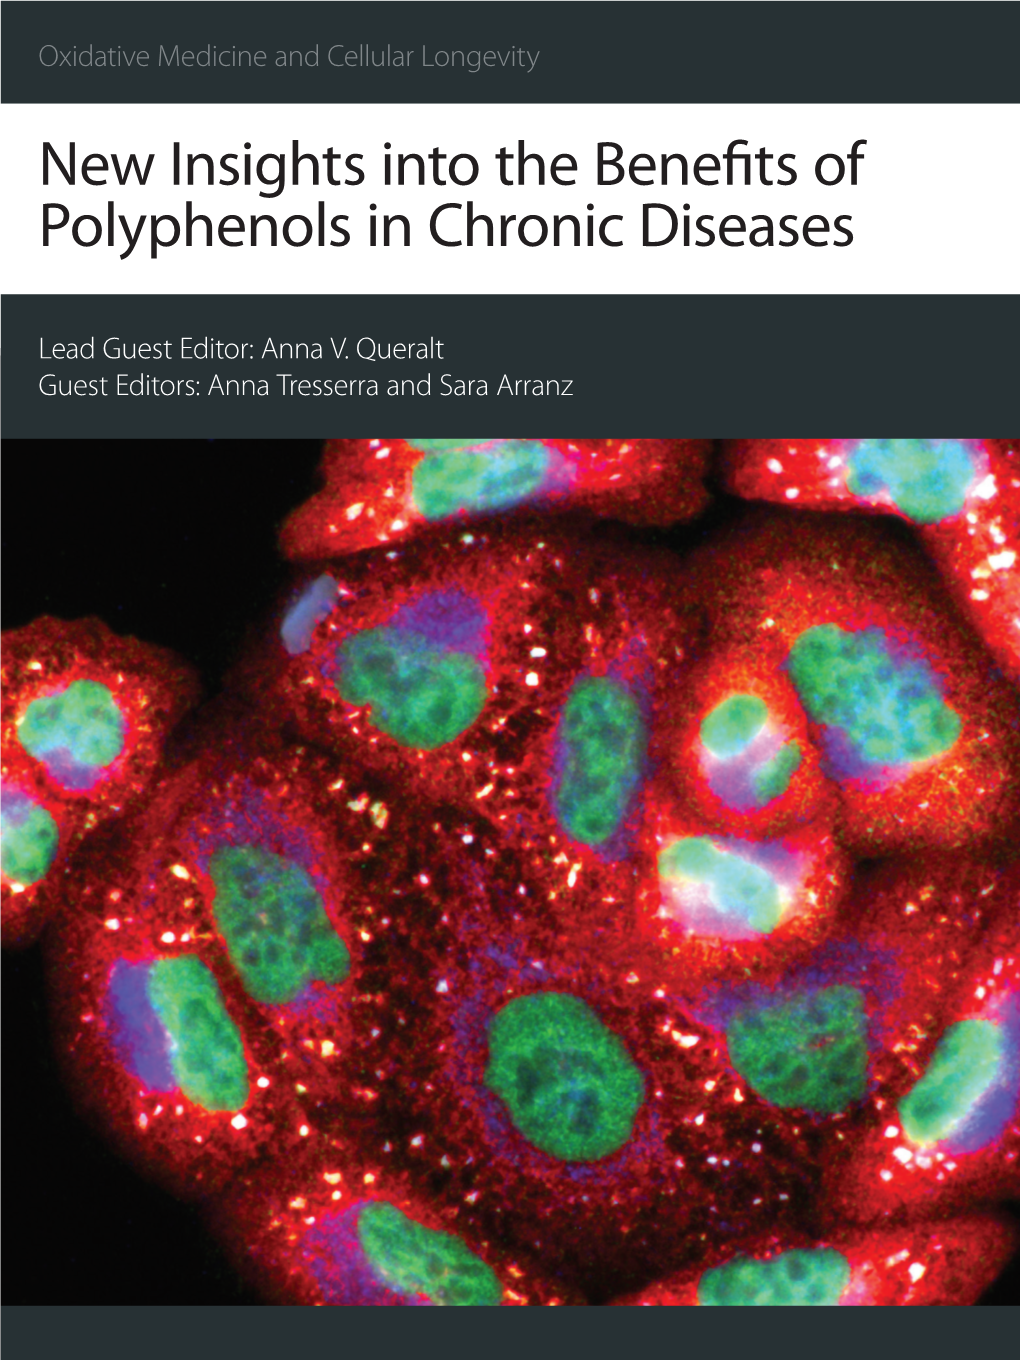 New Insights Into the Benefits of Polyphenols in Chronic Diseases